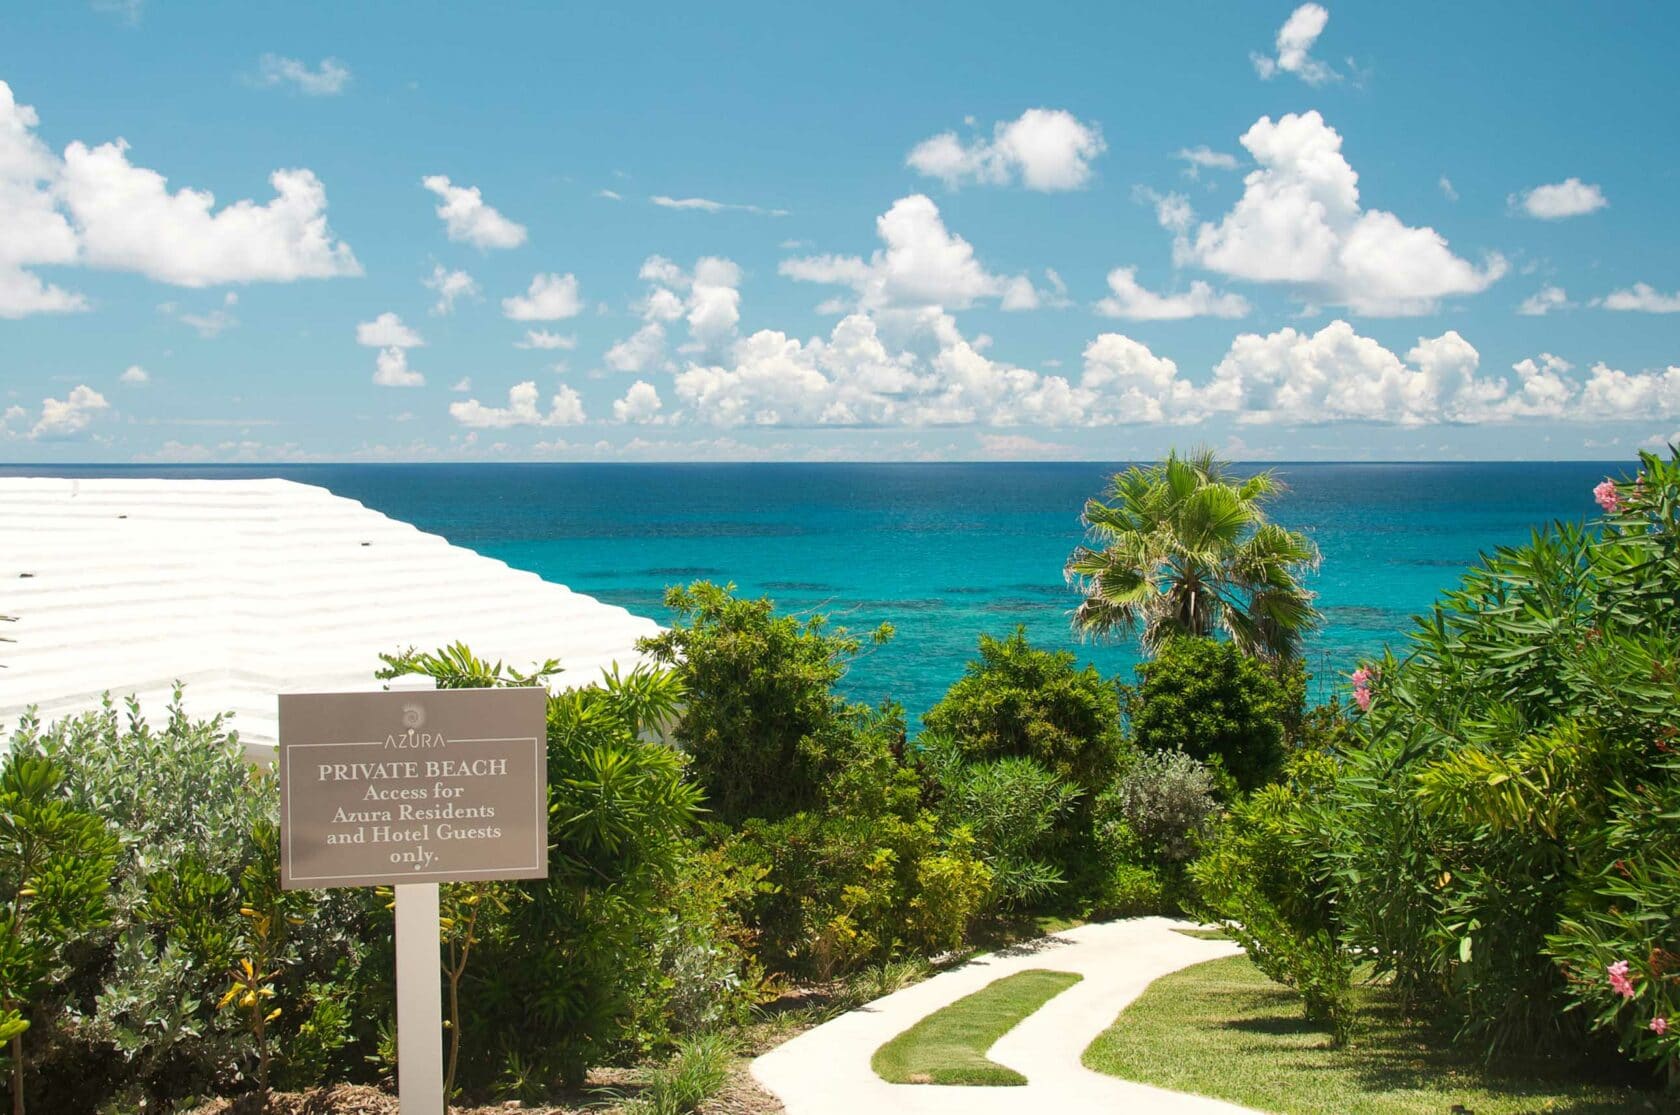 A path leading to a beach with a sign that reads, "Private Beach'.